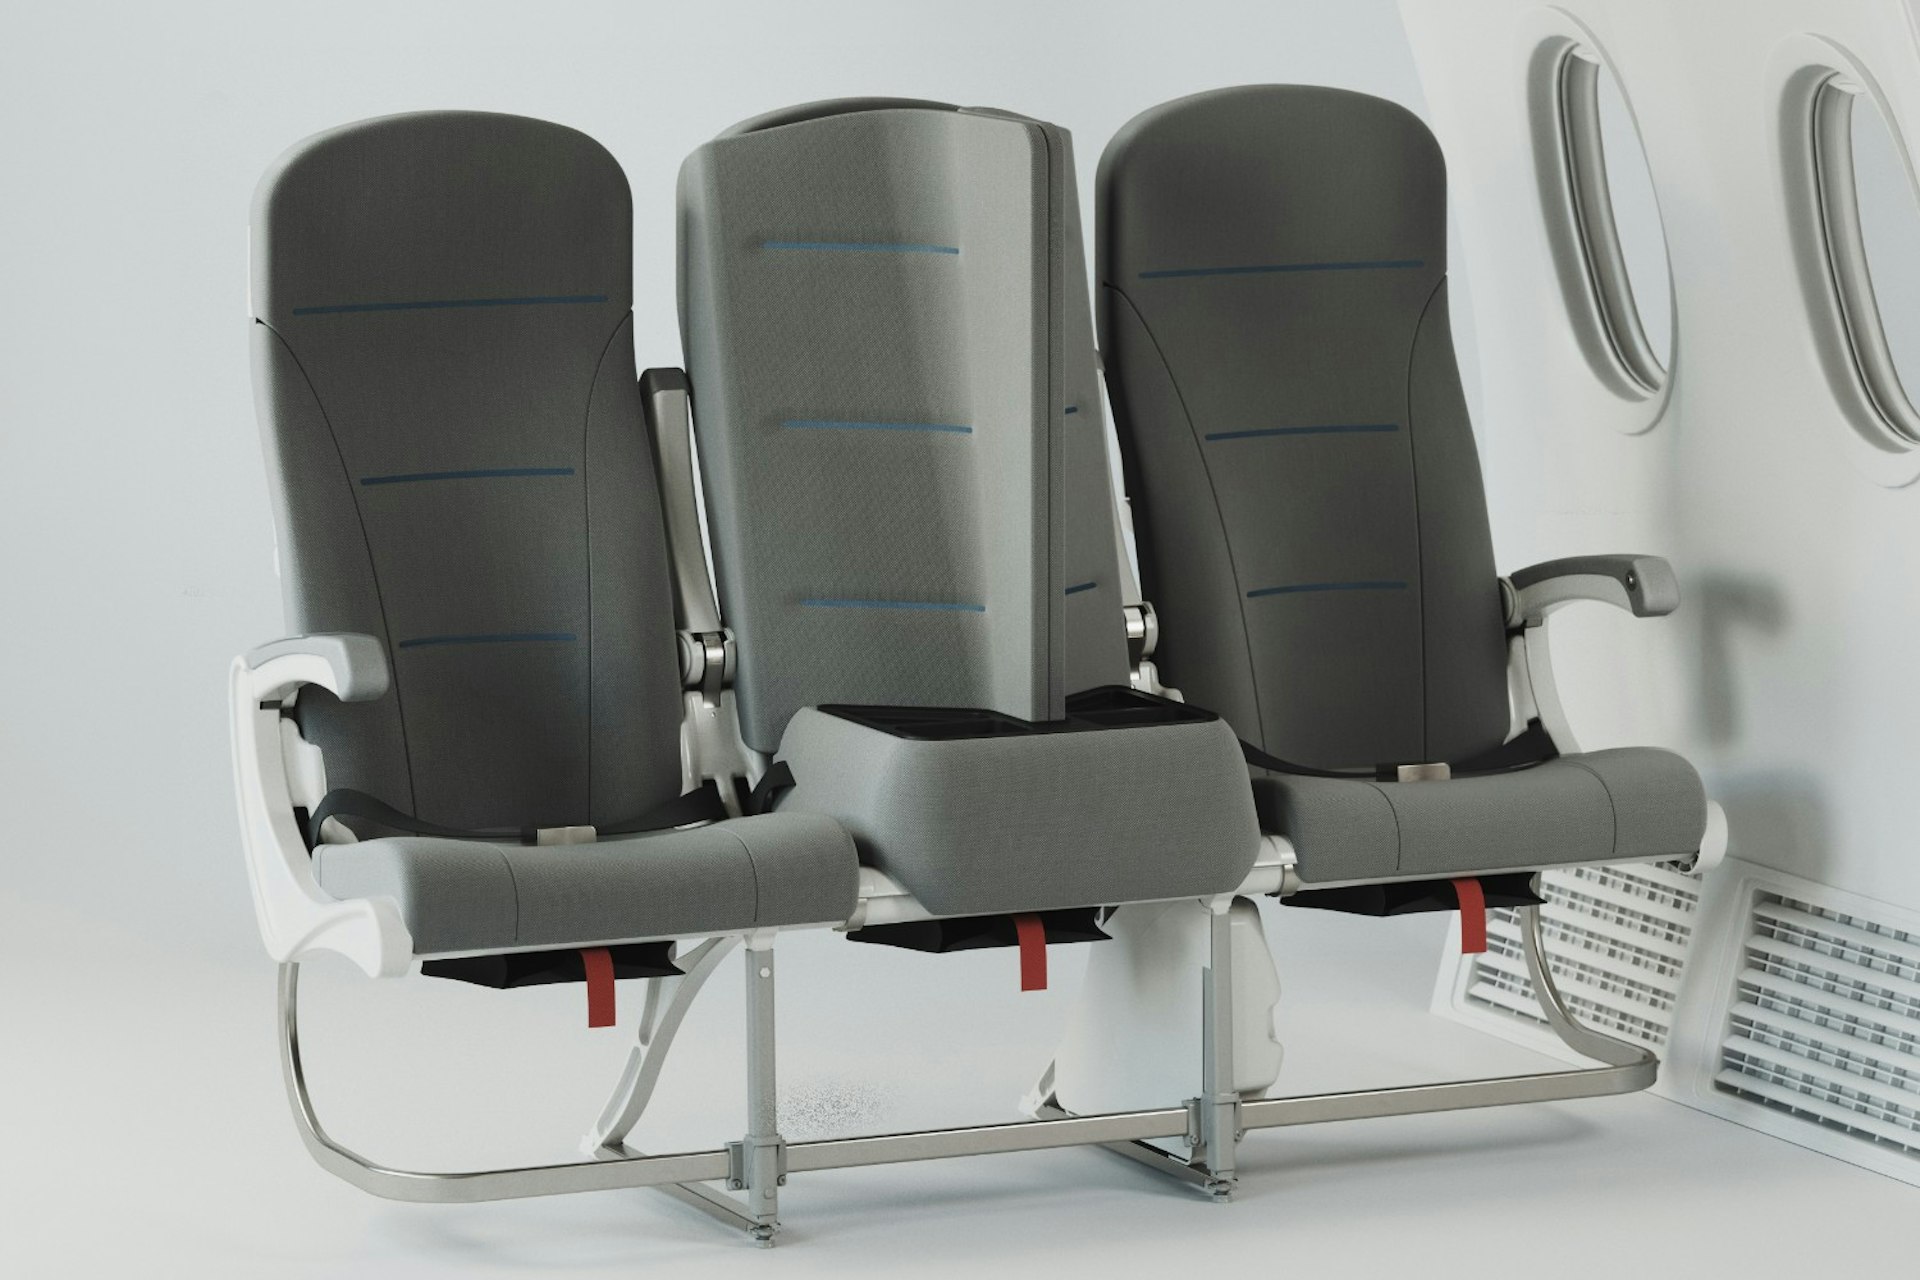 The prototype of the Interspace Lite plane seats